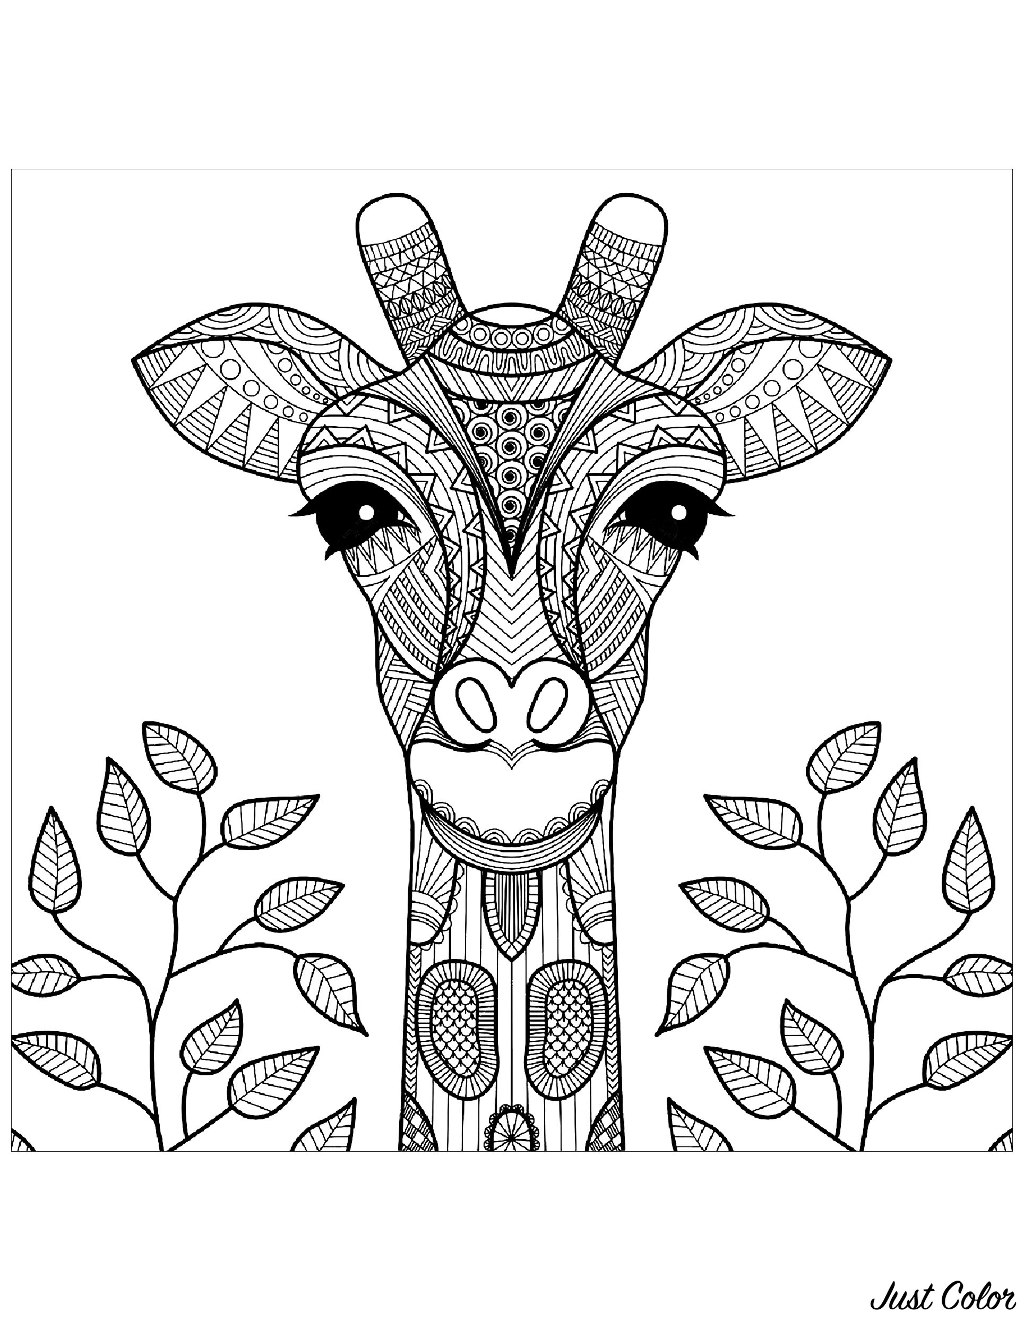 Simple Giraffes coloring page to print and color for free